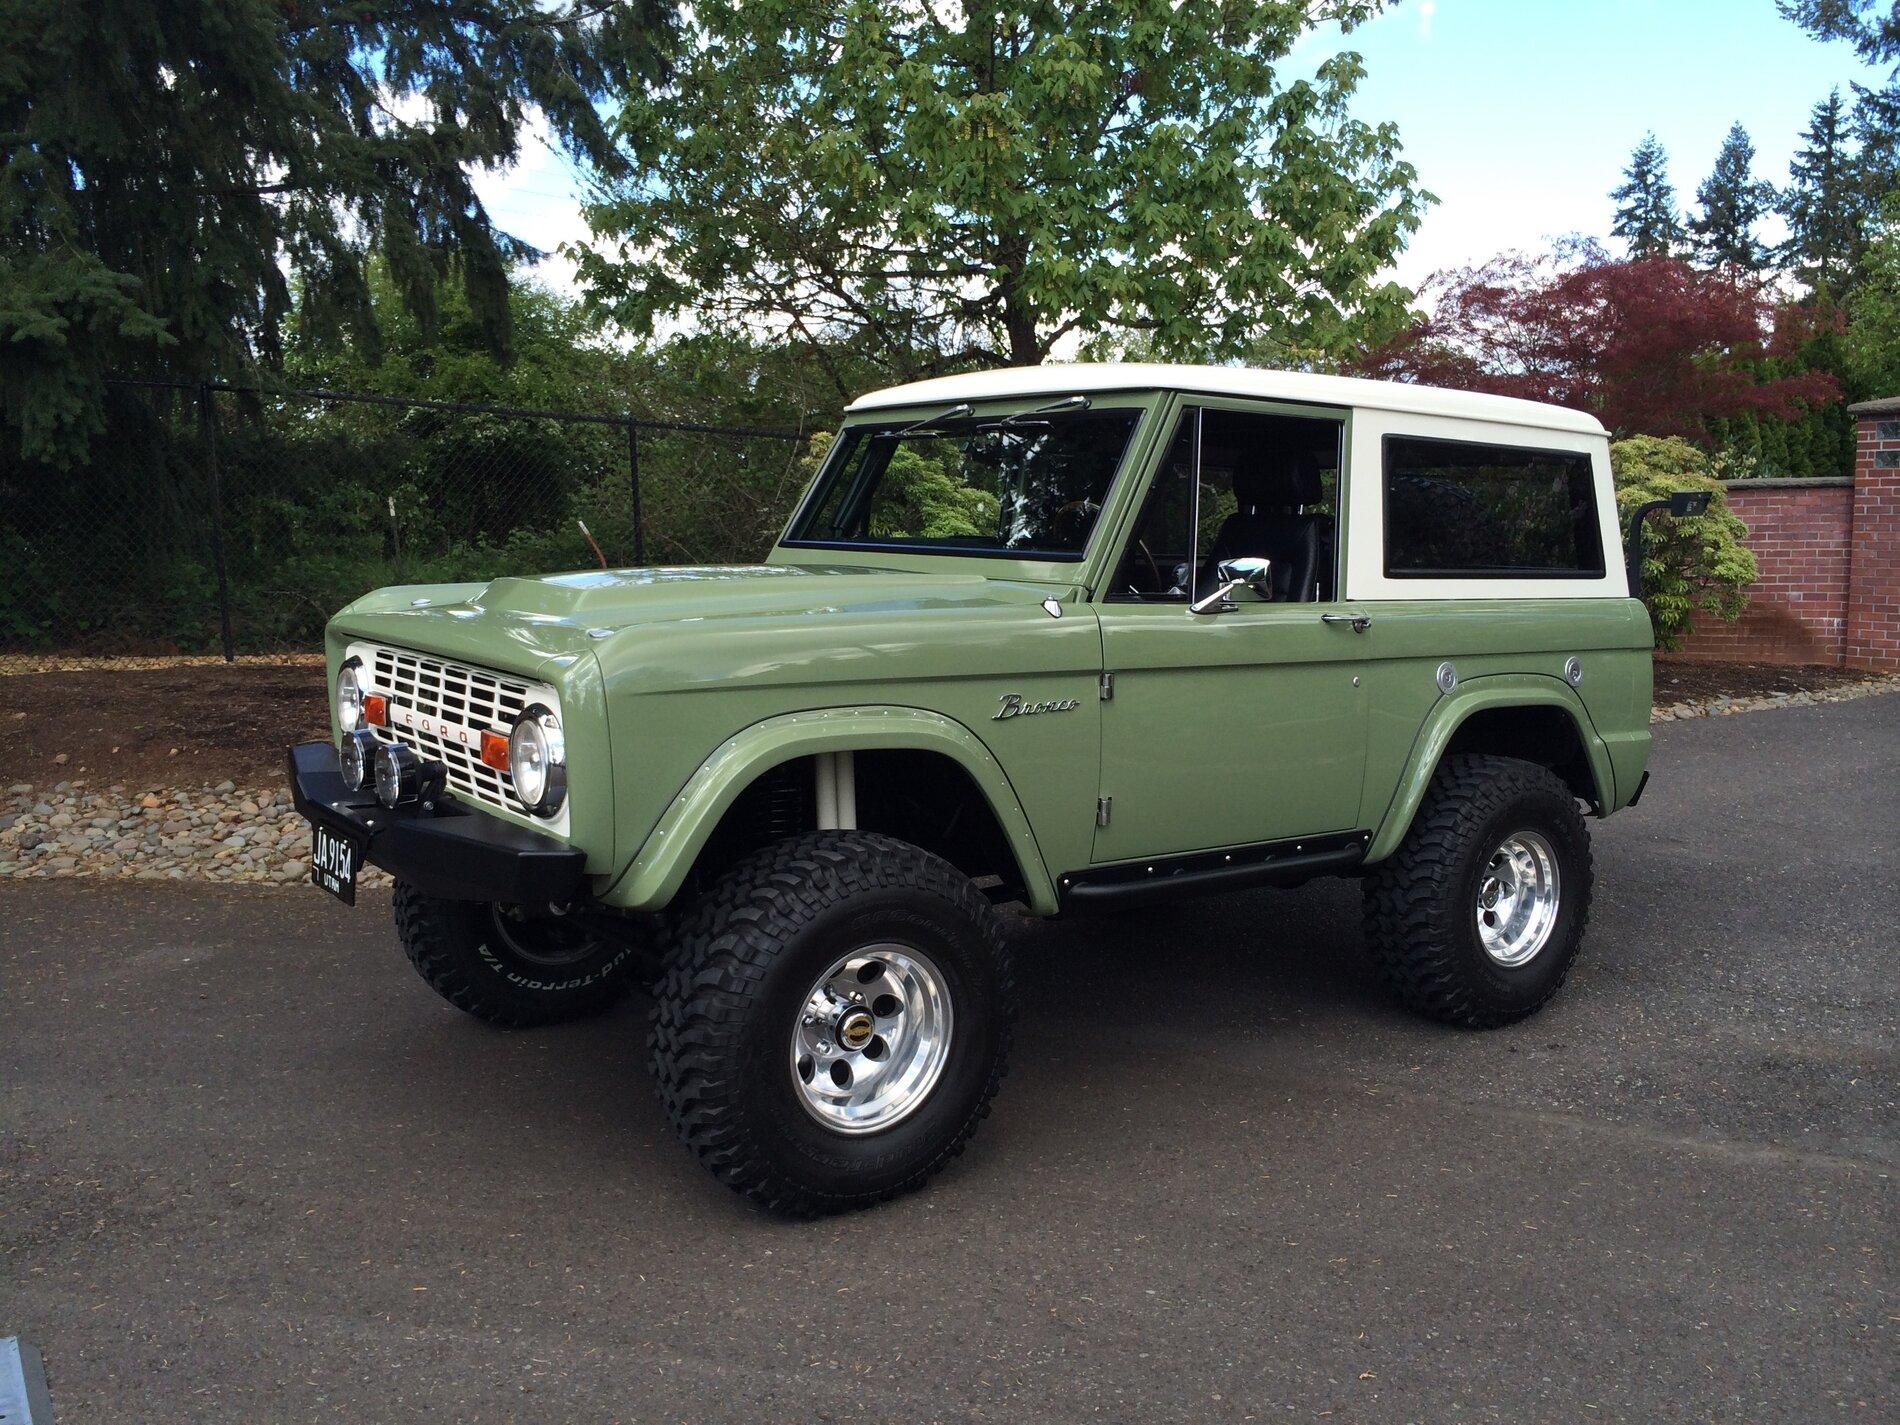 Ford Bronco Sage Green / Military Green 6th Gen Bronco Imagined IMG_4560